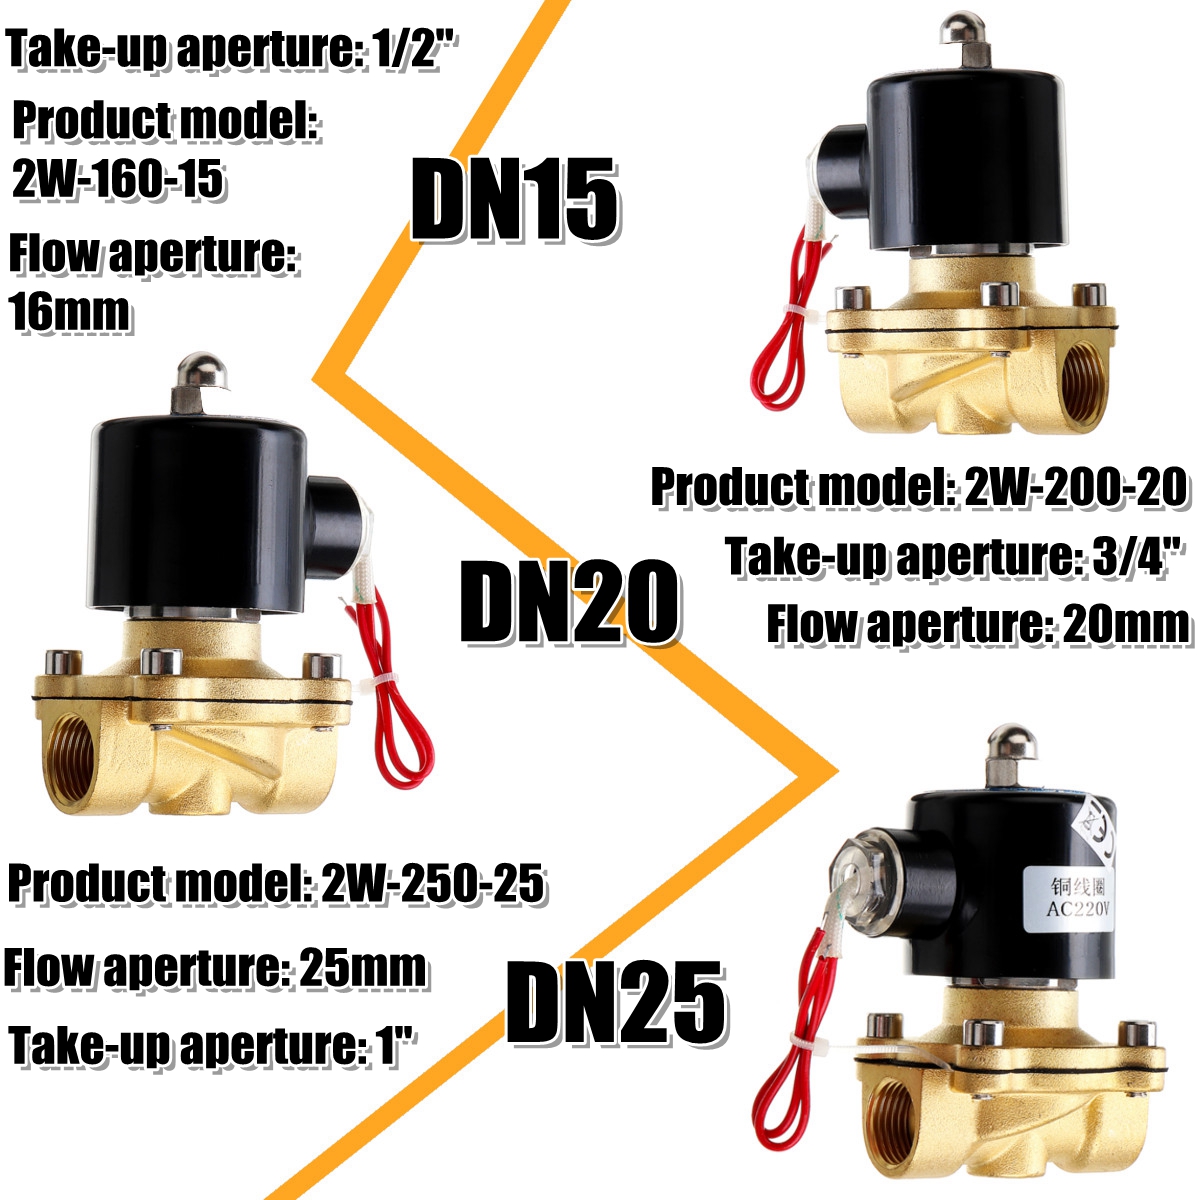 12-34-1-Inch-12V-Electric-Solenoid-Valve-Pneumatic-Valve-for-Water-Air-Gas-Brass-Valve-Air-Valves-1474540-2